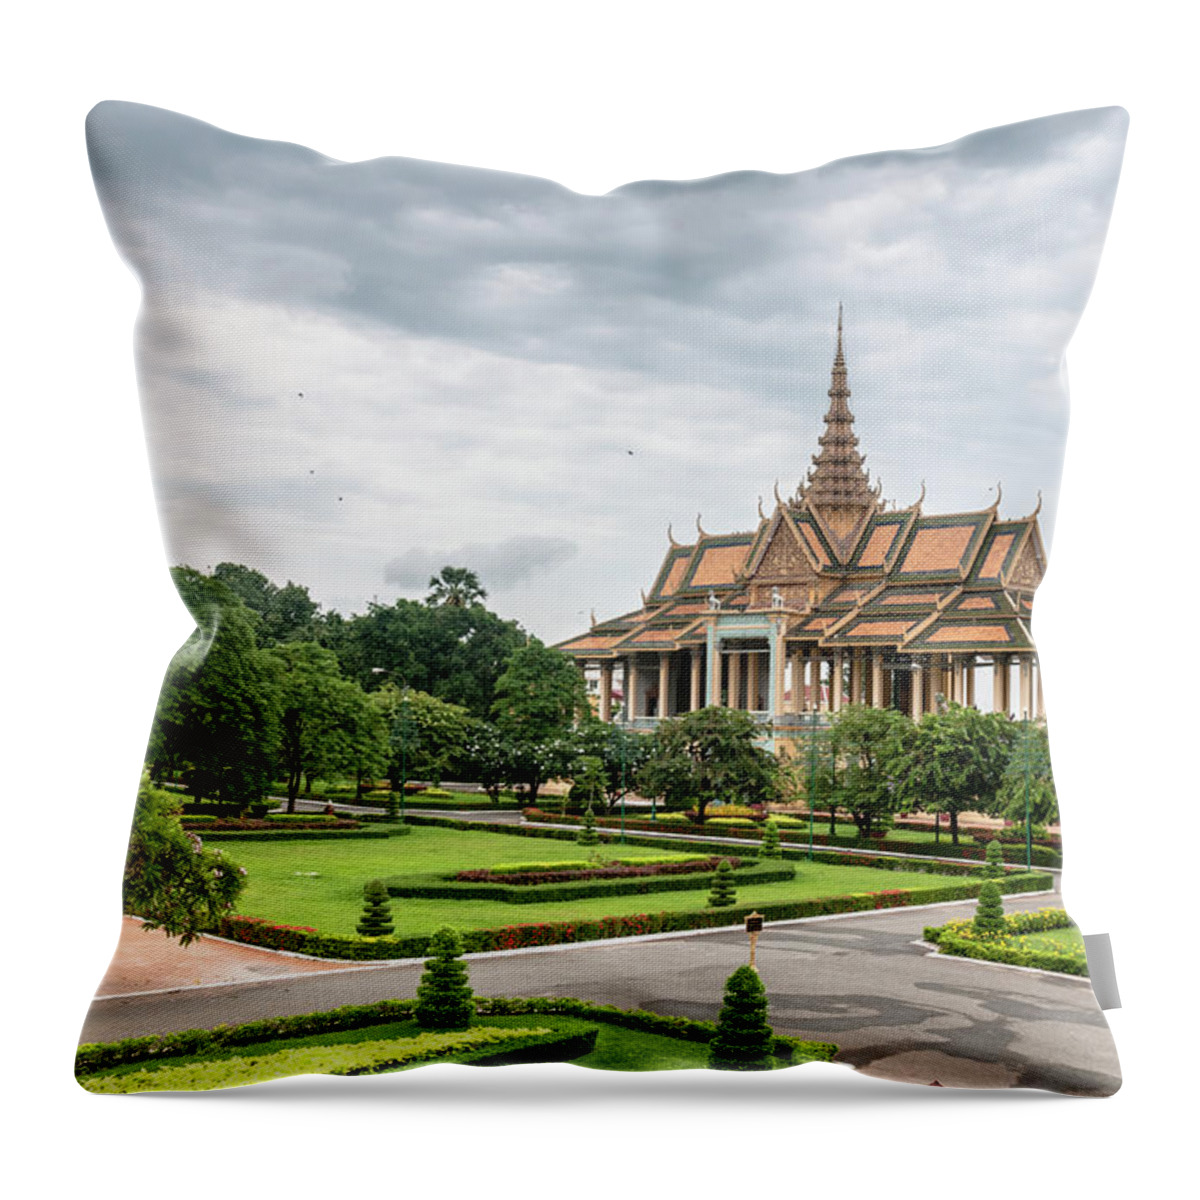 Southeast Asia Throw Pillow featuring the photograph Gardens At The Royal Palace In Phnom by Tbradford